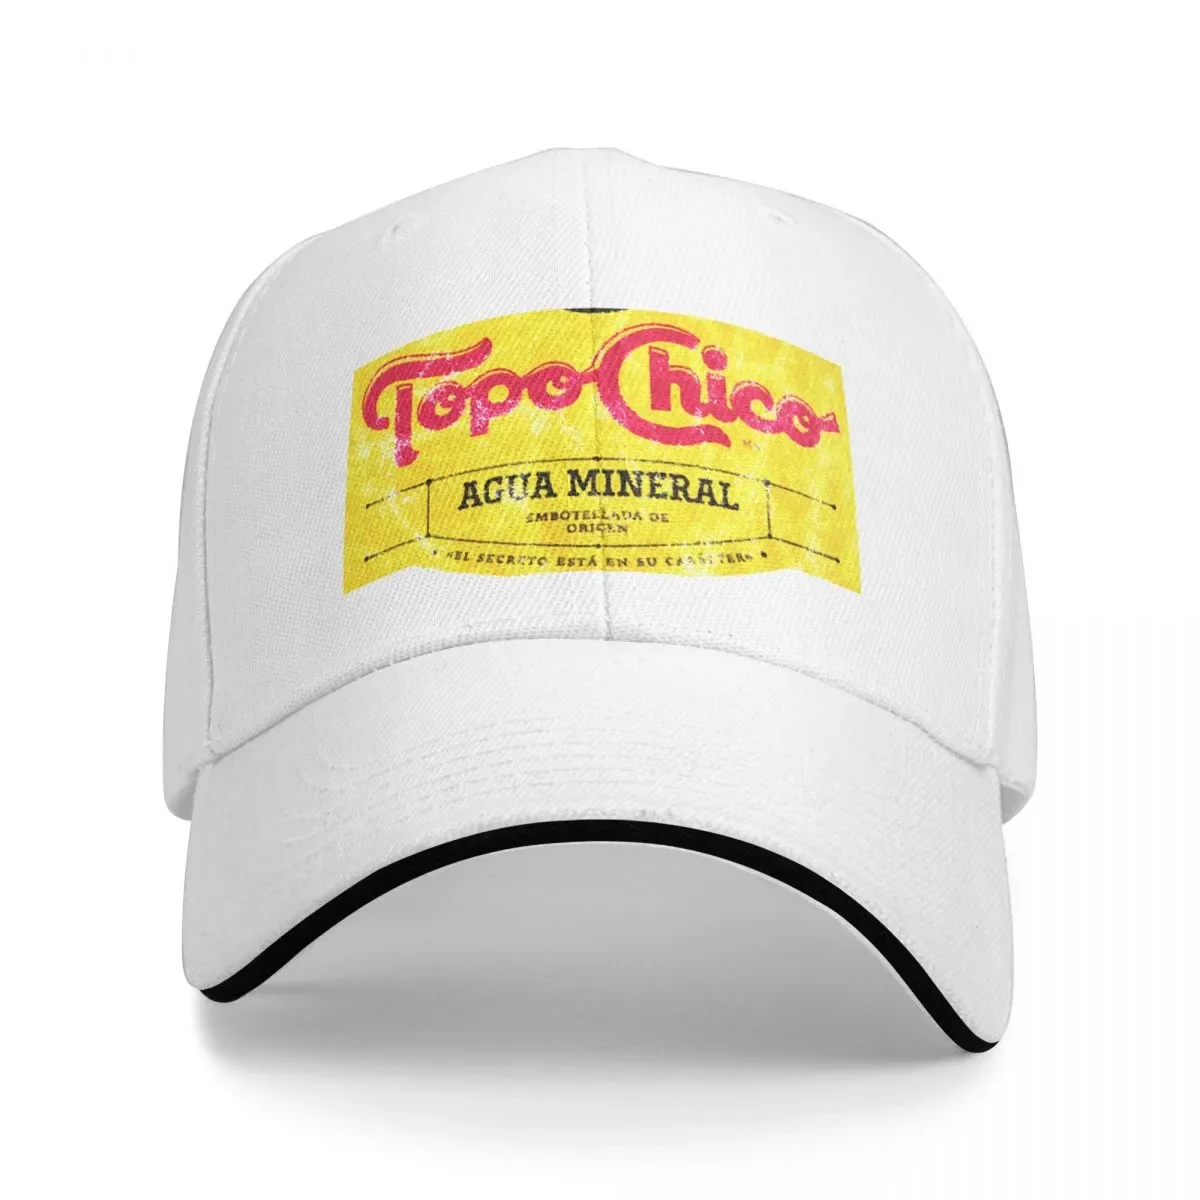 

New Topo Chico agua mineral worn and washed logo (sparkling mineral water) Classic Cap Baseball Cap golf Man hat Women's